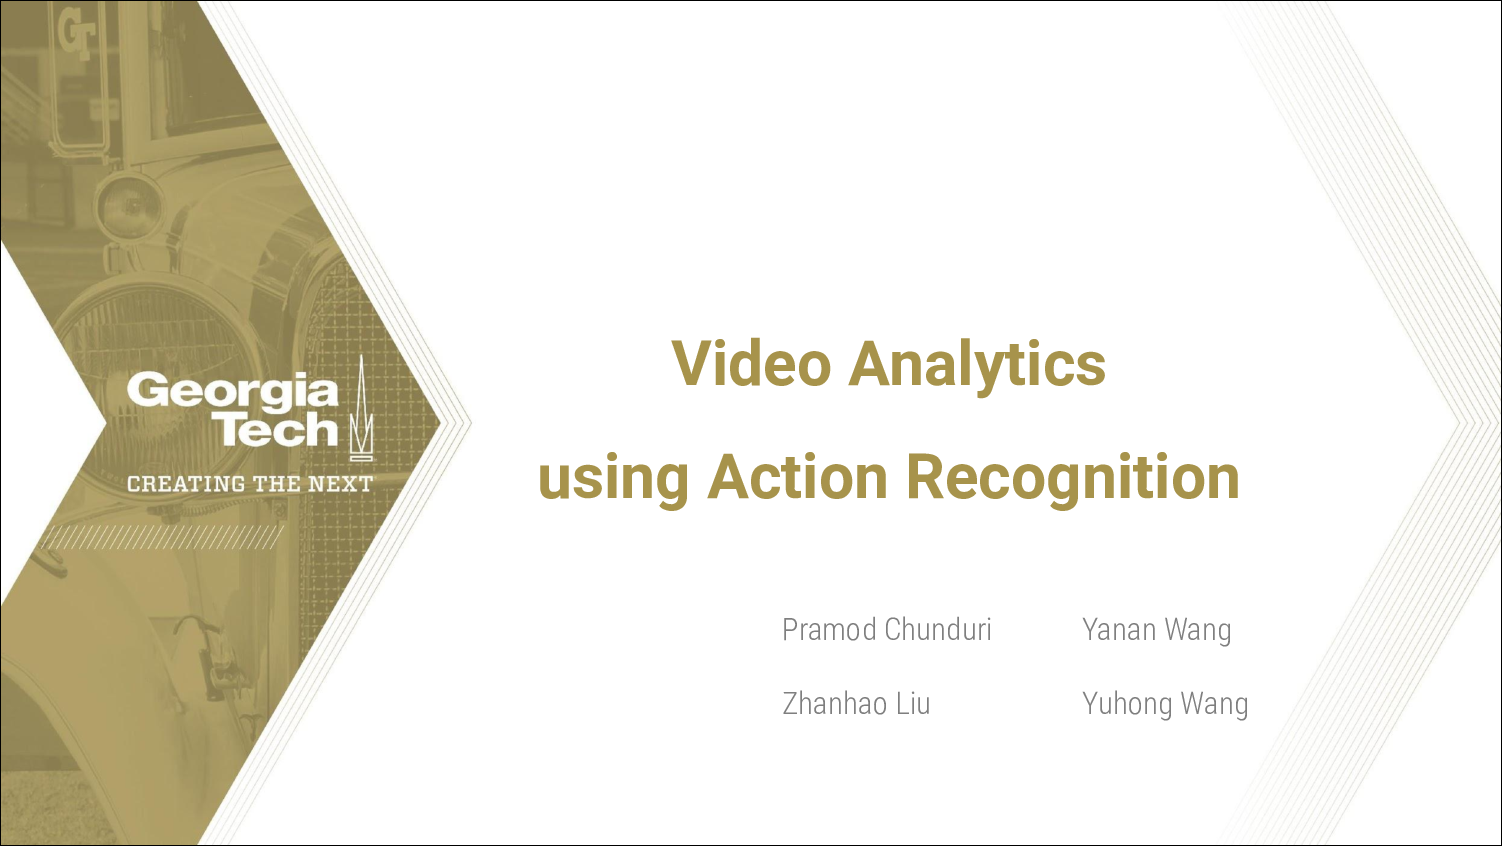 [PRESENTATION]  Video Analytics using Action Recognition